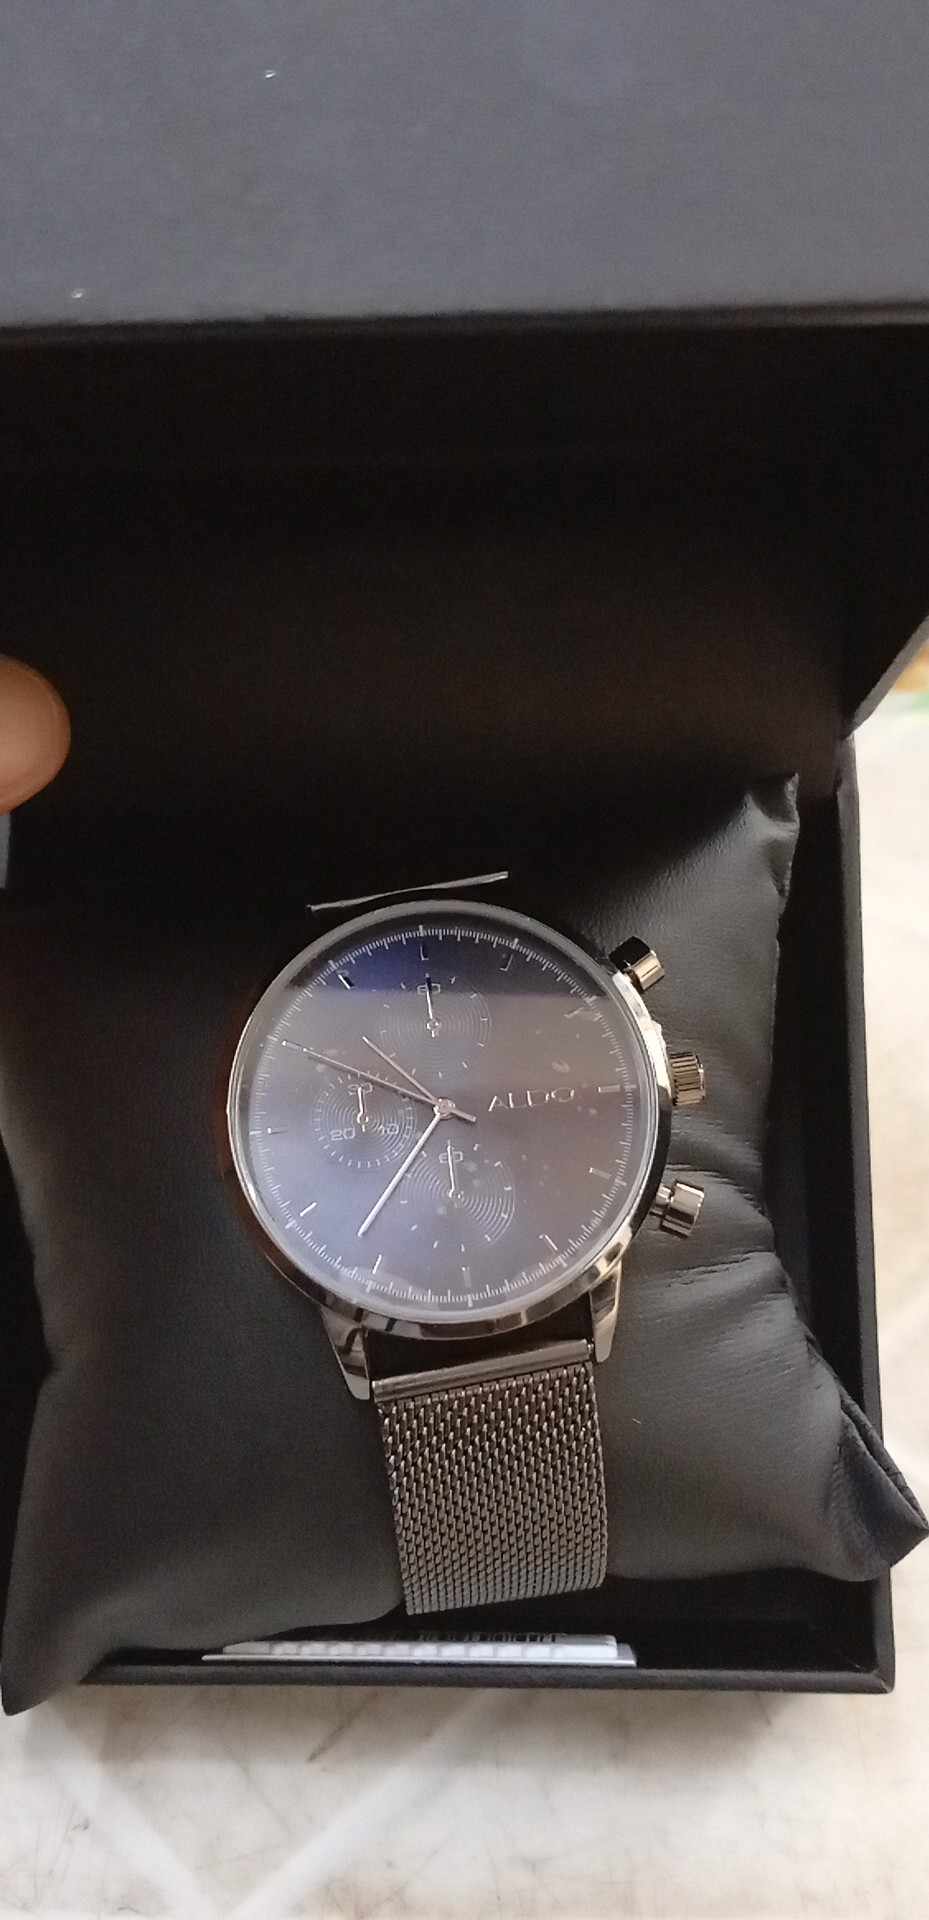 Dad tries to steal watch in Cebu City mall, gets caught, lands in jail. This is the watch that a 29-year-old man tried to allegedly steal from a mall at the South Road Properties (SRP) on Saturday, April 27. | Paul Lauro